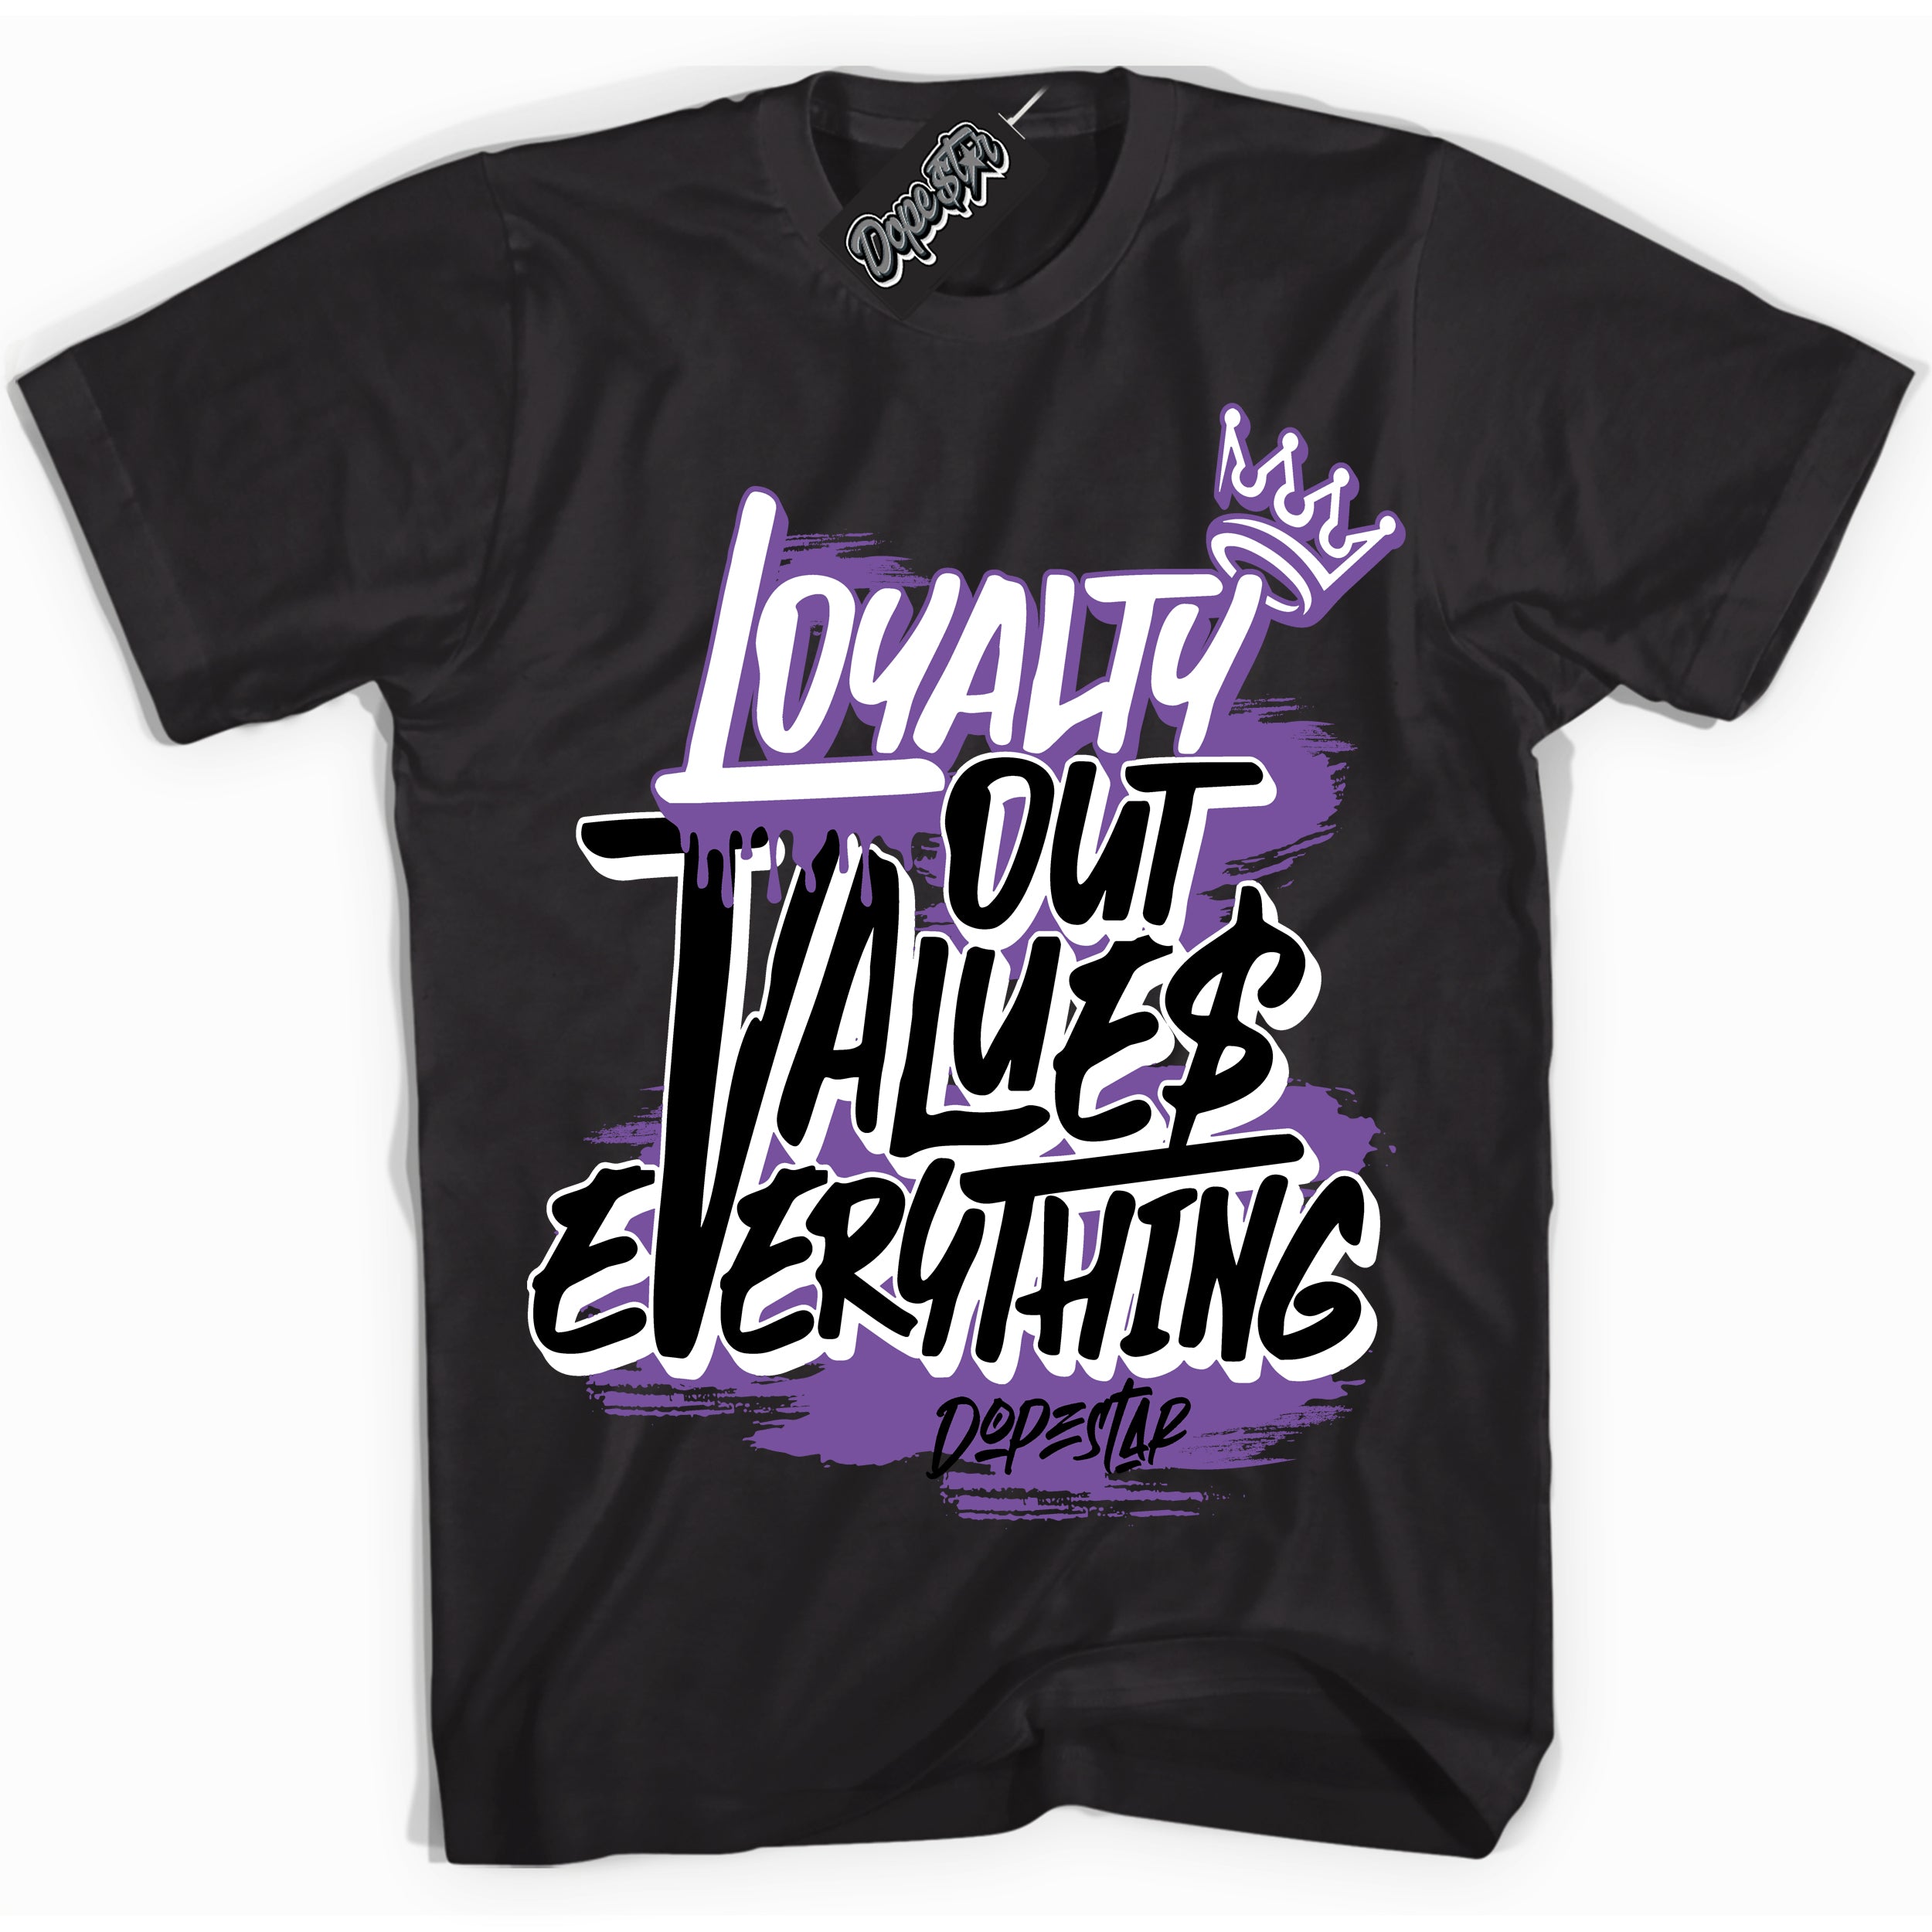 Cool Black Shirt with “ Loyalty Out Values Everything” design that perfectly matches FlyEase Black Bright Violet 1s Sneakers.